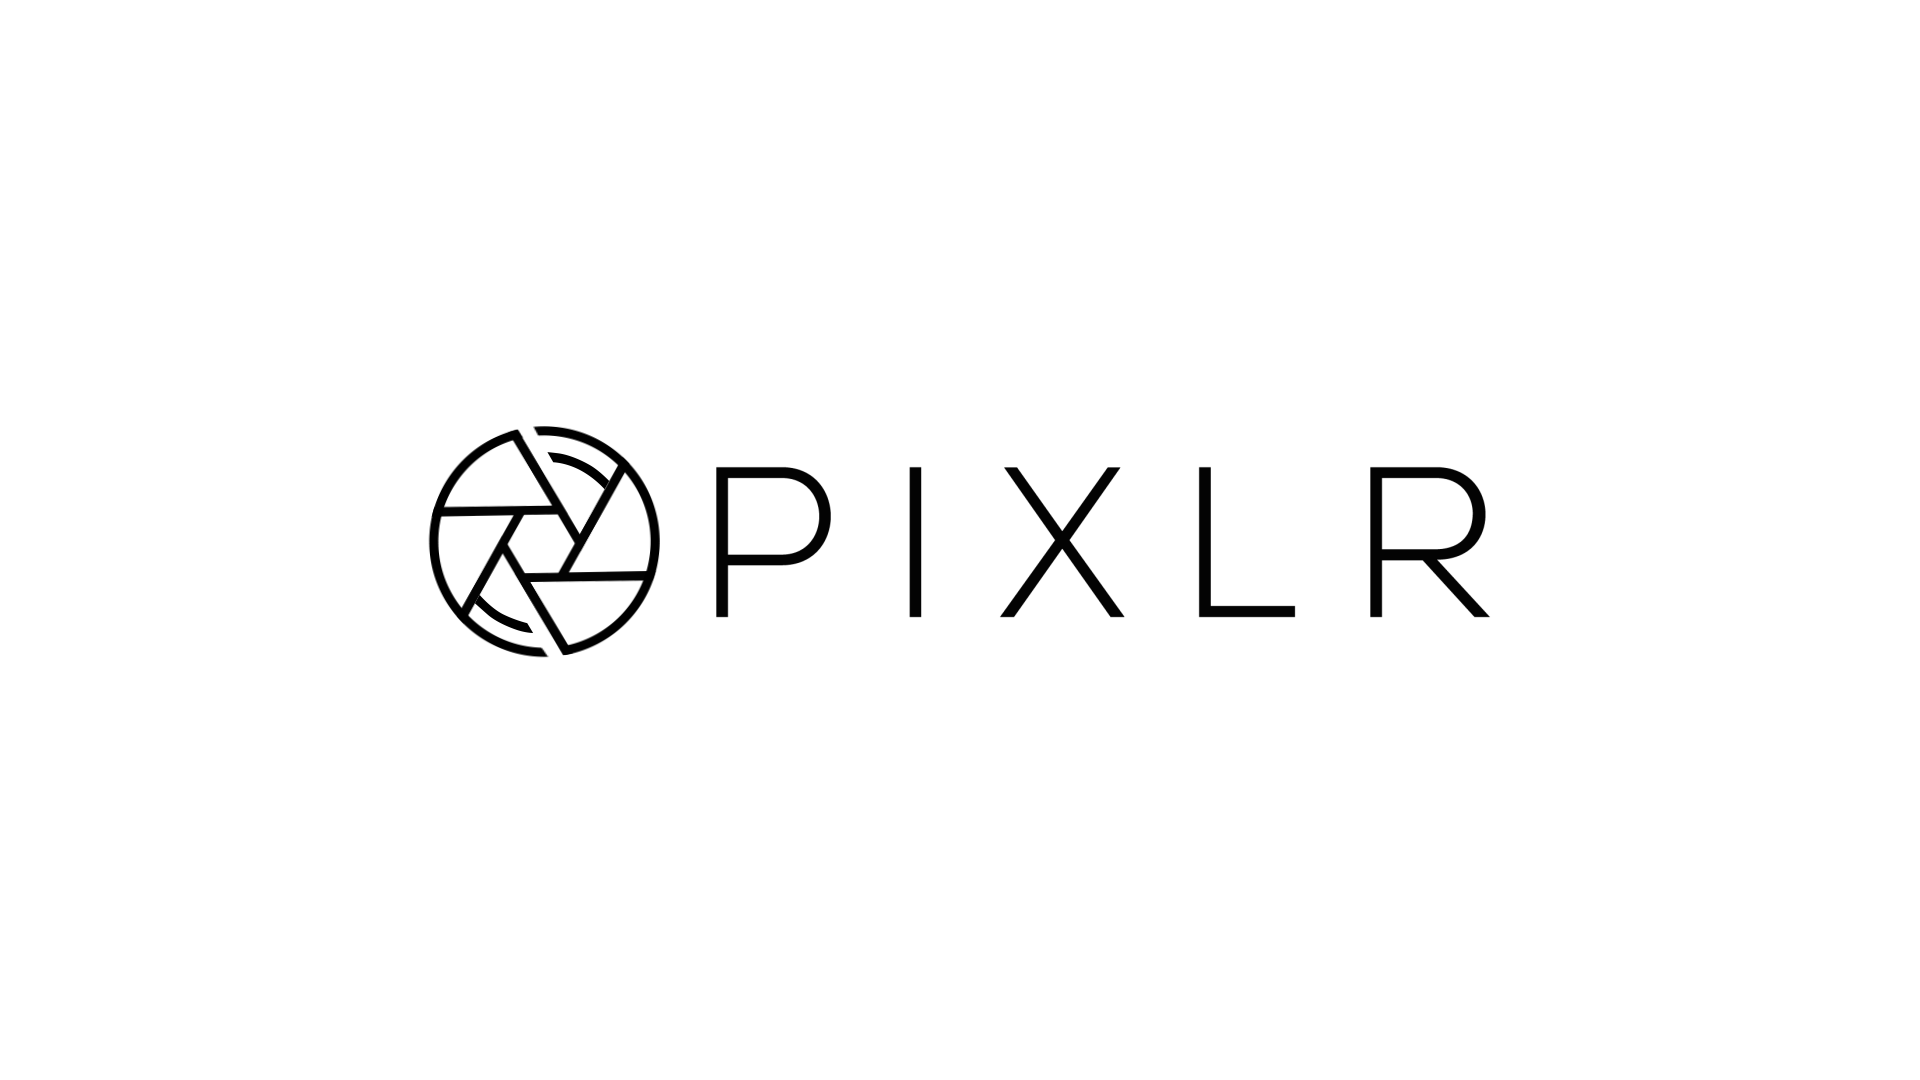 Pixlr Reimagined - New Logo, New Look & New Features